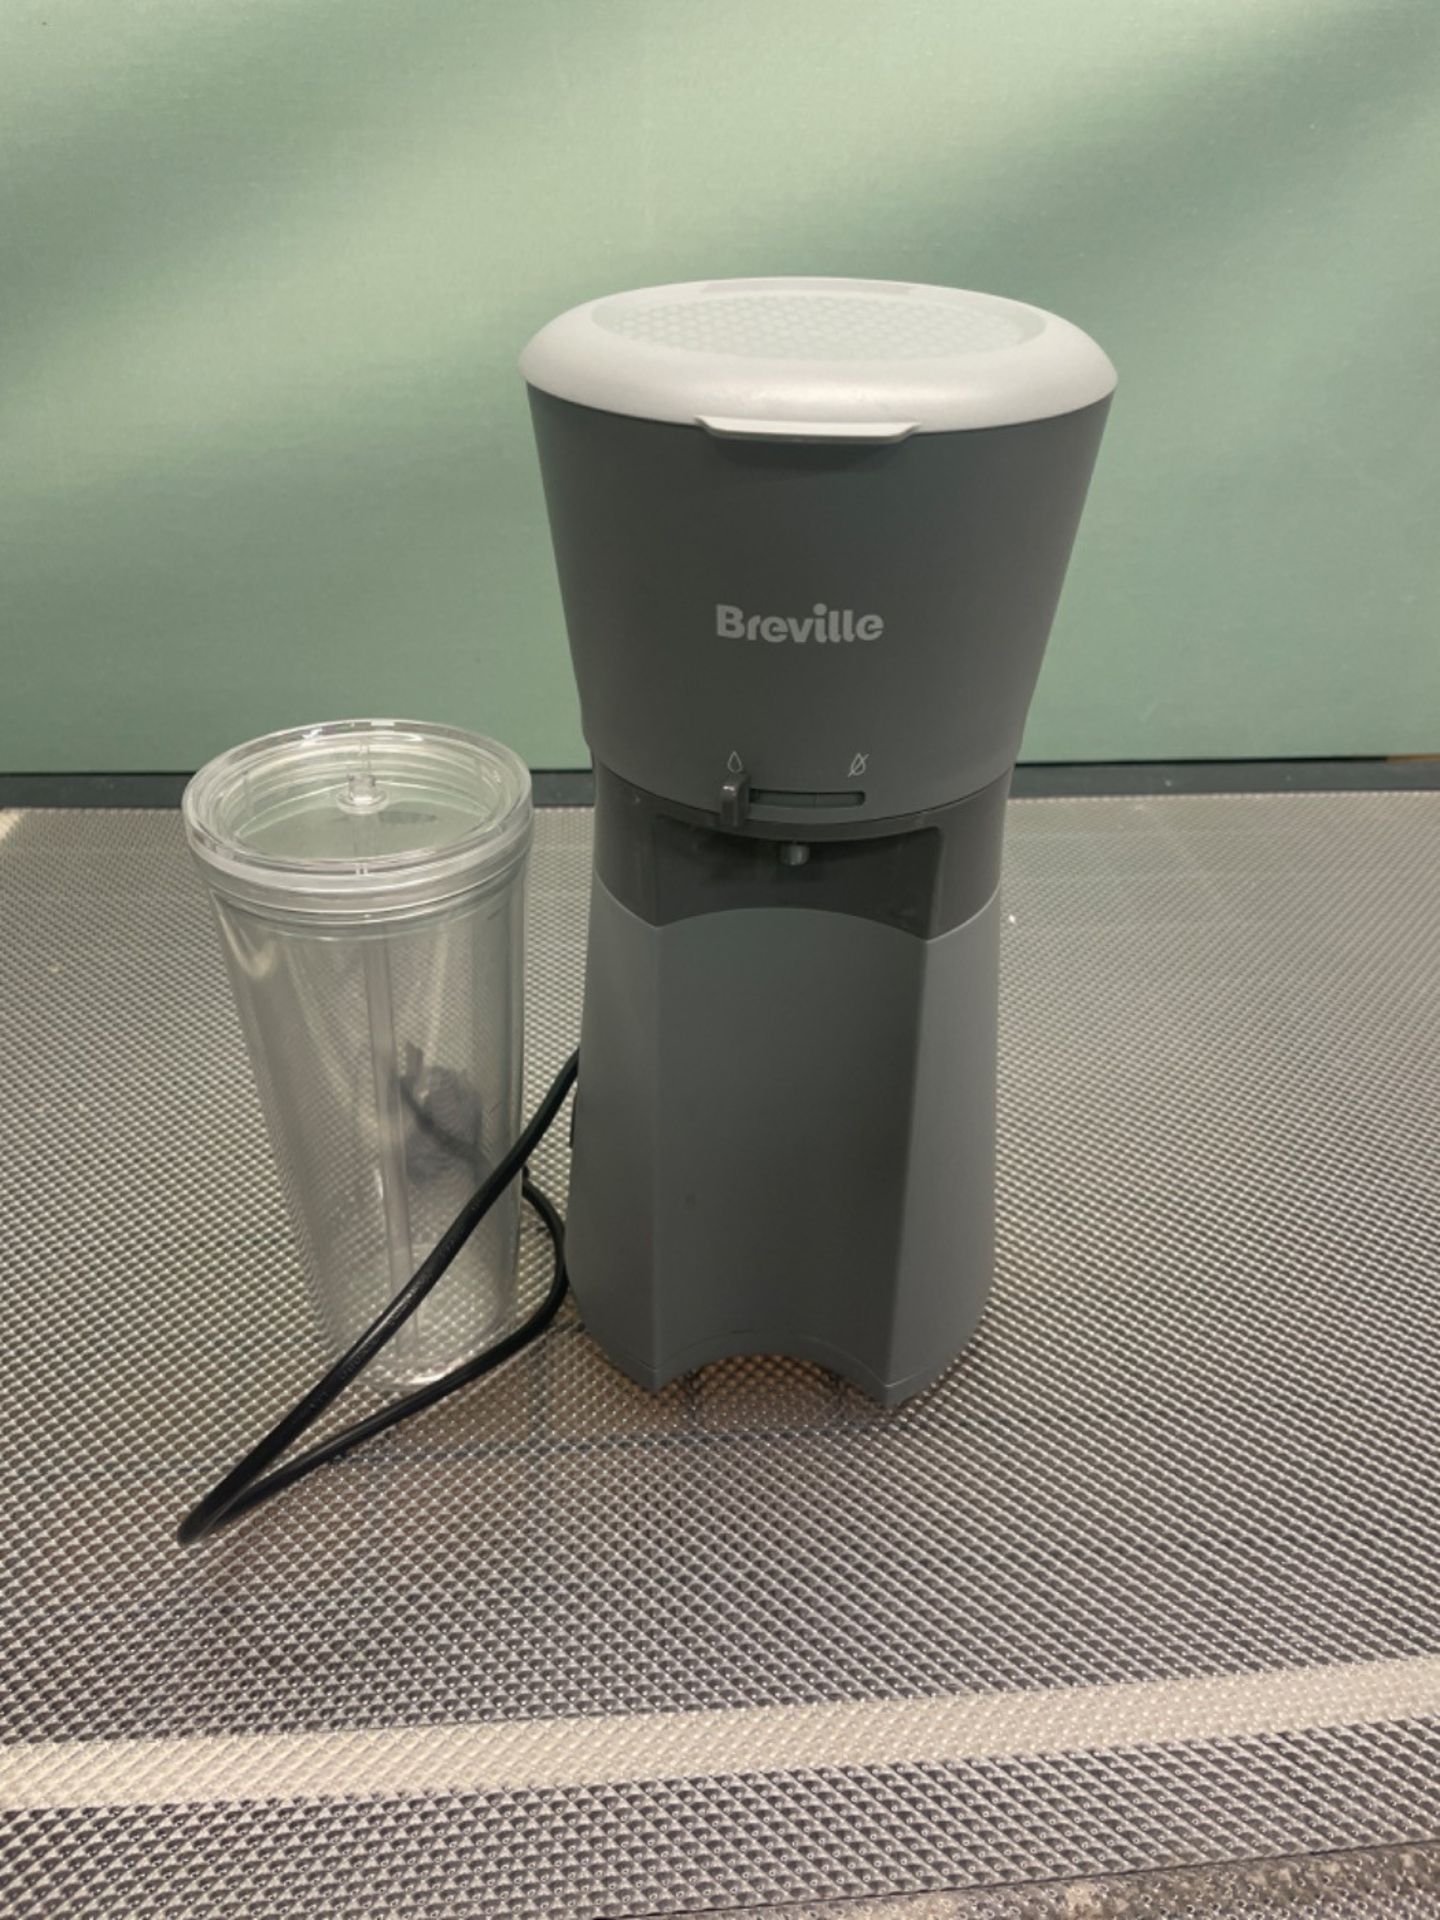 Breville Iced Coffee Maker | Single Serve Iced Coffee Machine Plus Coffee Cup with Straw | Ready... - Image 2 of 2